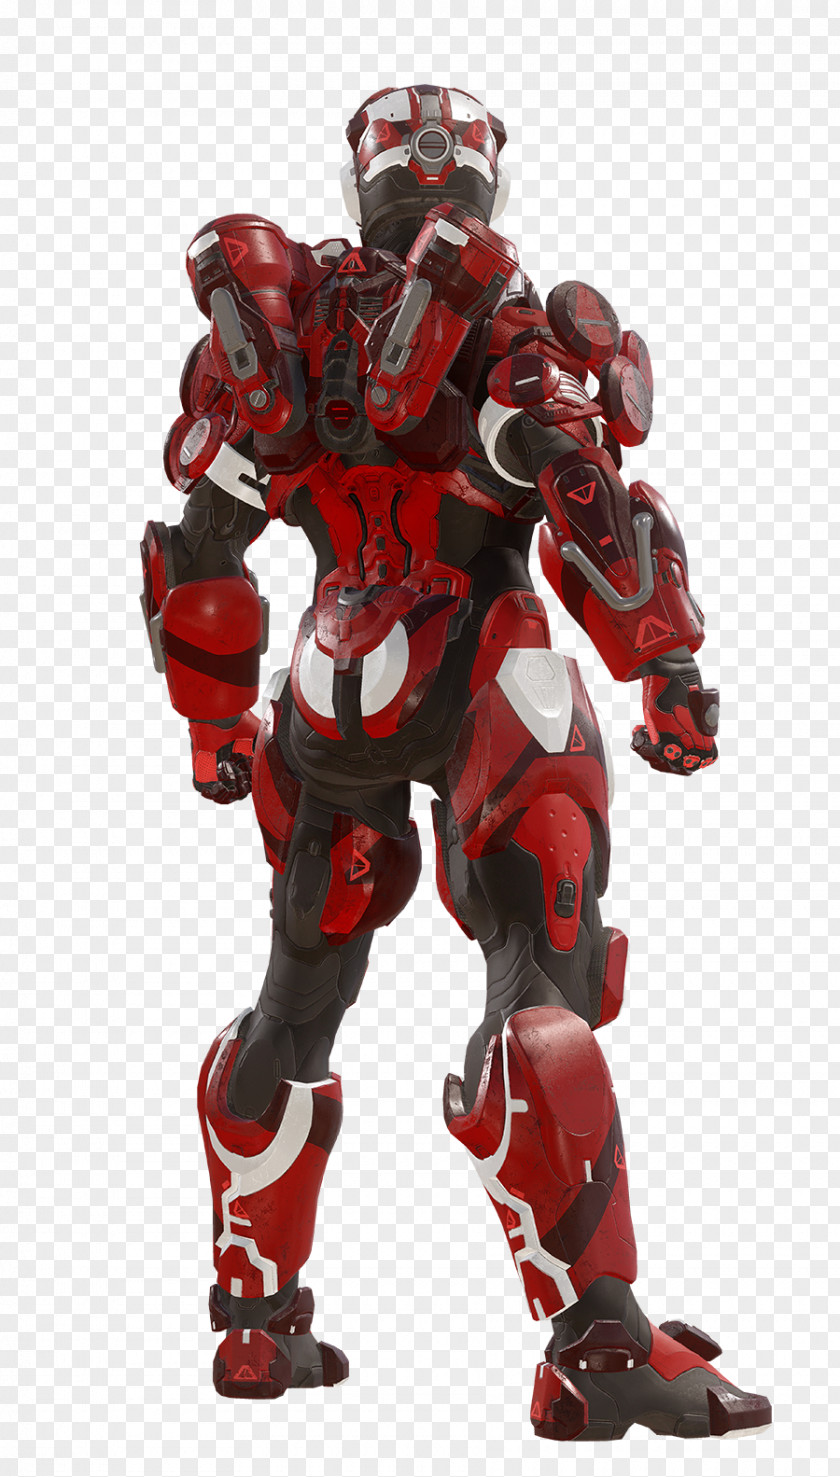 Red Edge Halo 5: Guardians Multiplayer Video Game 343 Industries Armour PNG